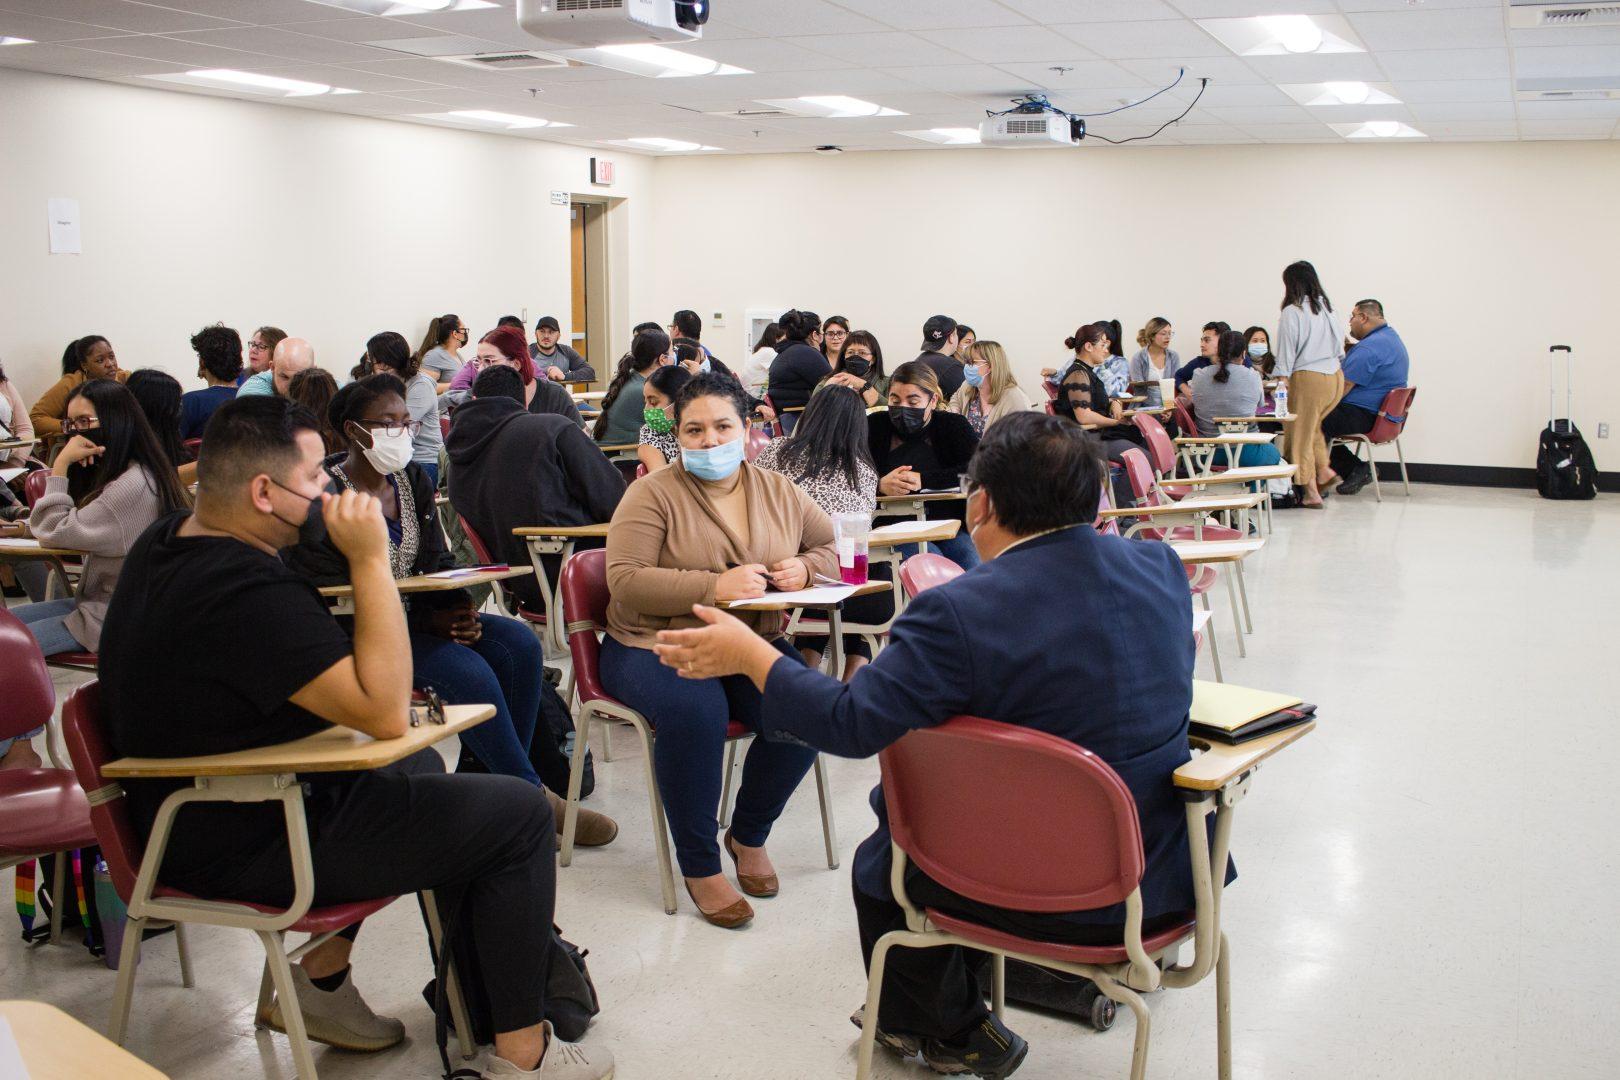 Students and faculty took part in the Sustain workshop on March 16, 2022. (Julia Espinoza/The Collegian)